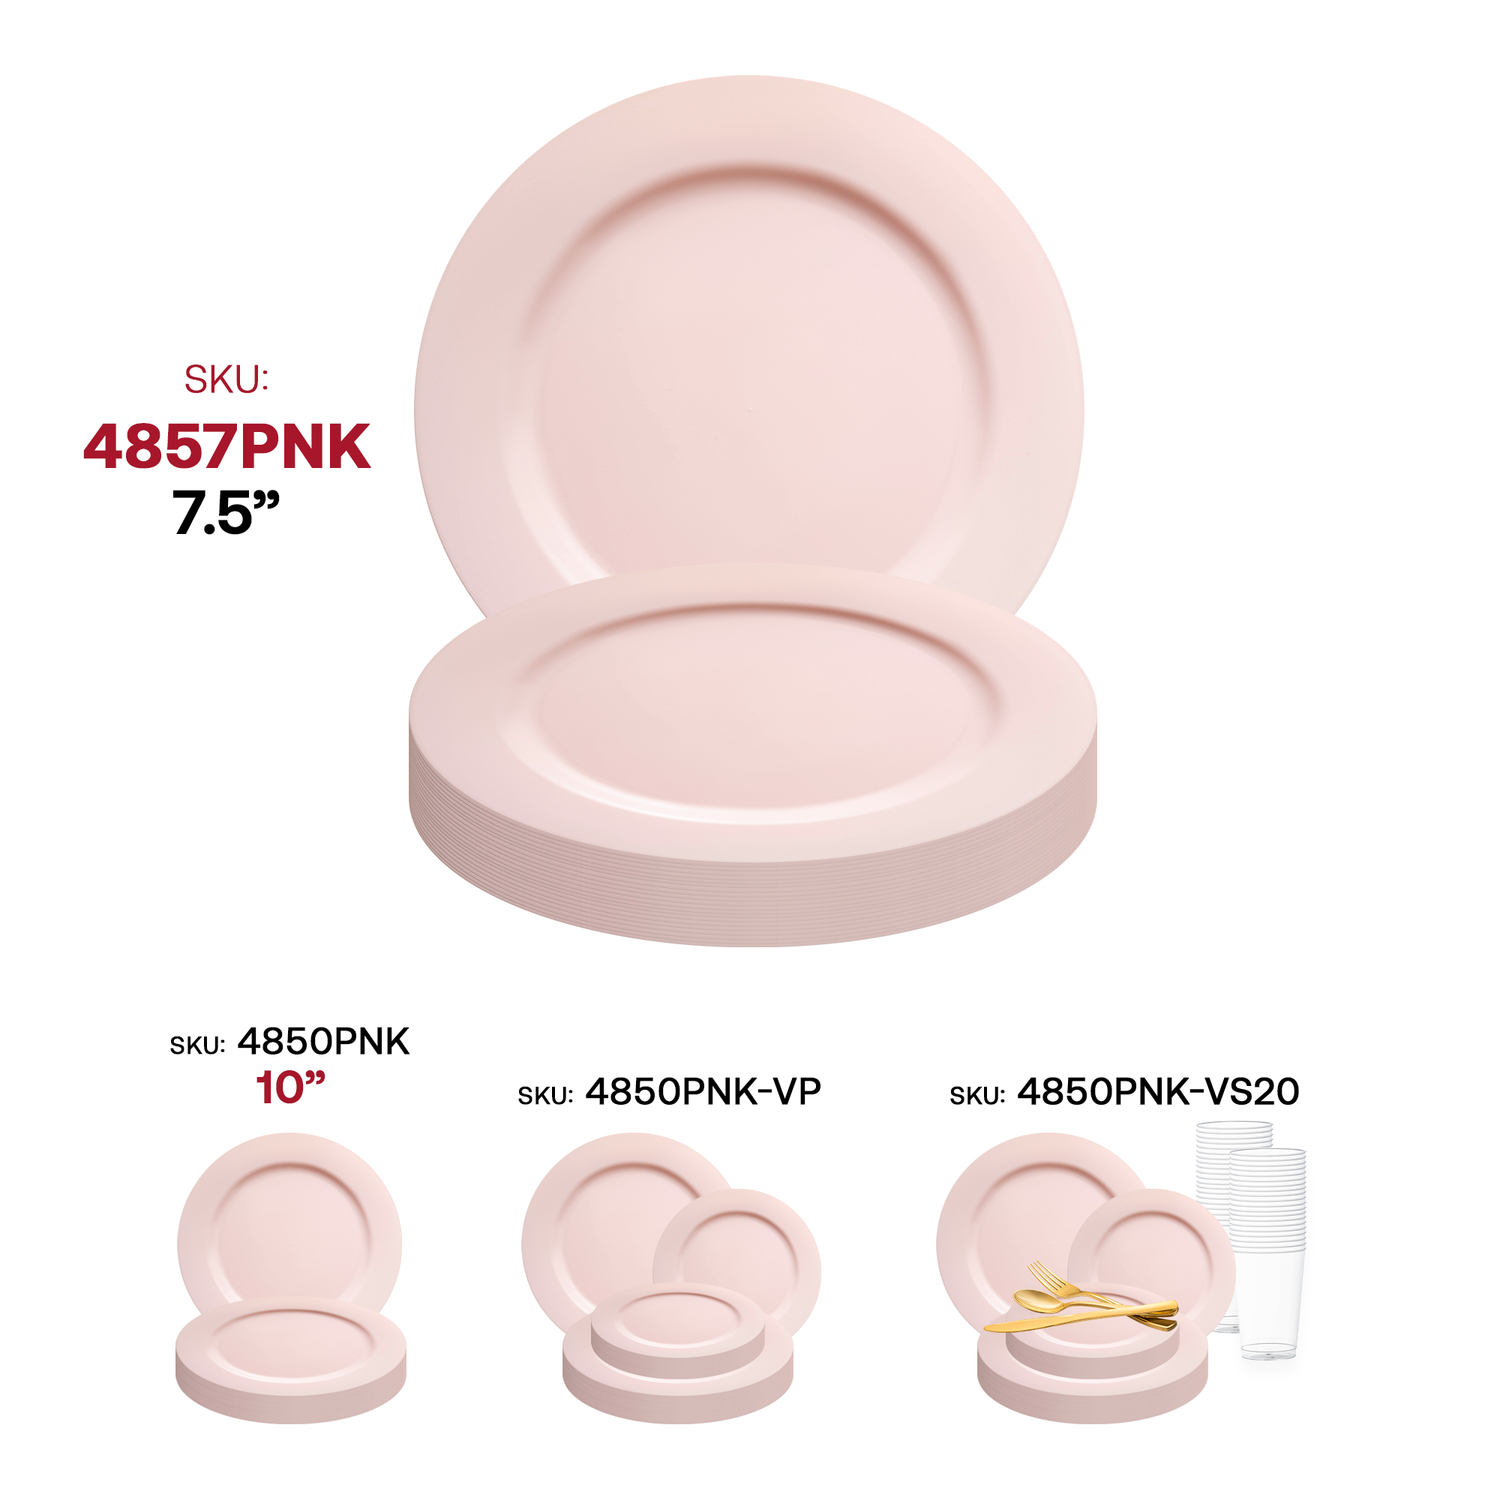 Matte Pink Round Disposable Plastic Appetizer/Salad Plates (7.5") SKU | The Kaya Collection